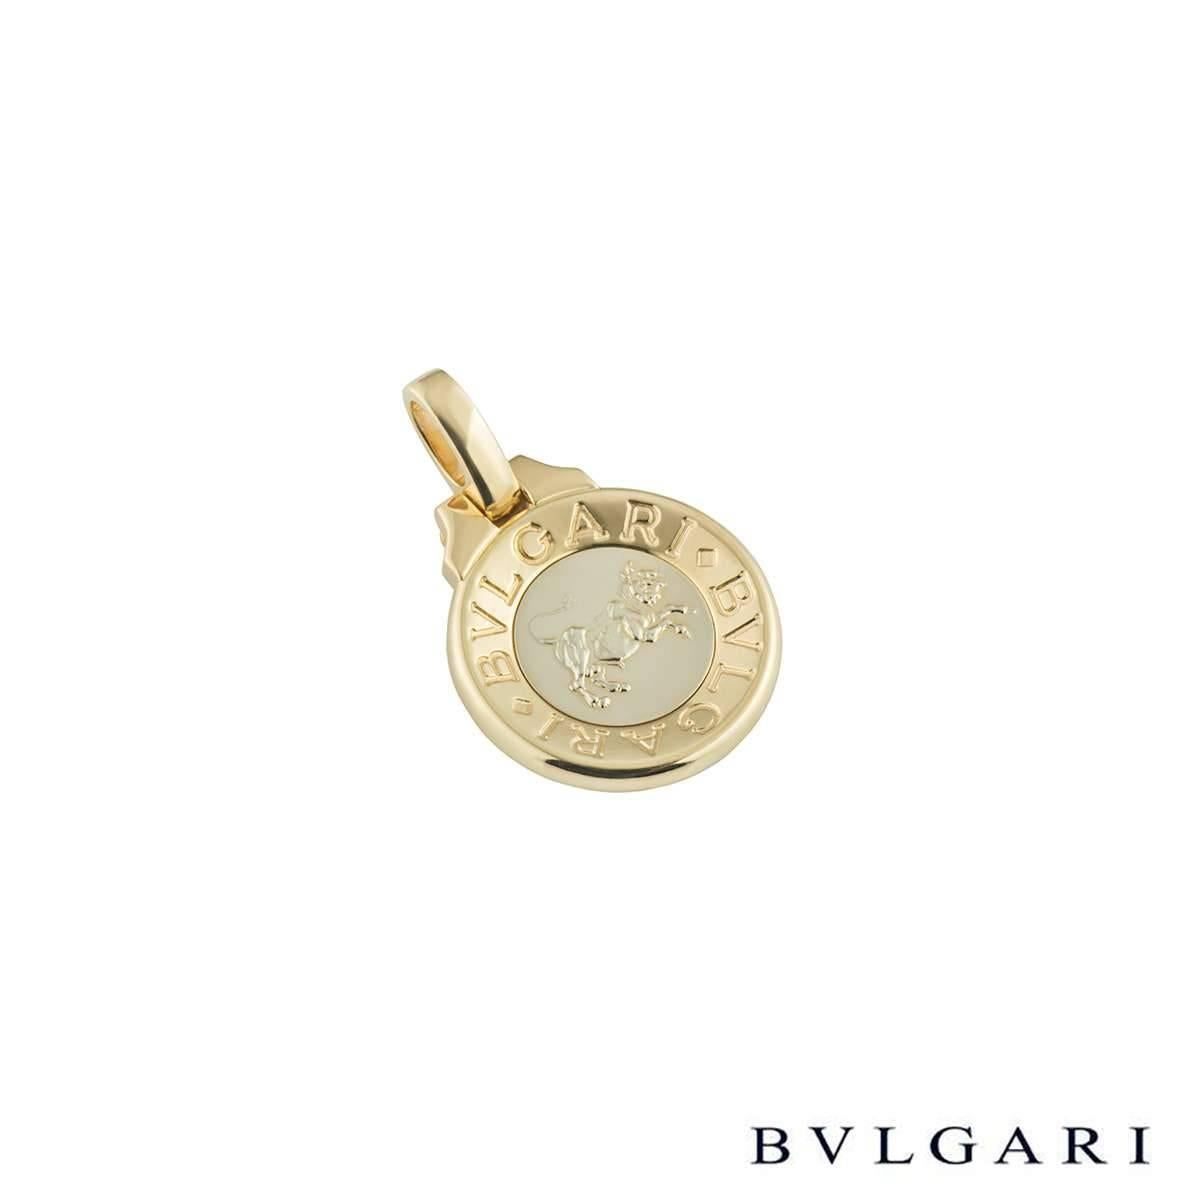 A unique 18k yellow and white gold Bvlgari zodiac pendant. The pendant comprises of a coin emblem with 'Bvlgari Bvlgari' around the outer edge. Complimenting this is a white gold centre with an embossed taurus zodiac sign. The pendant features a